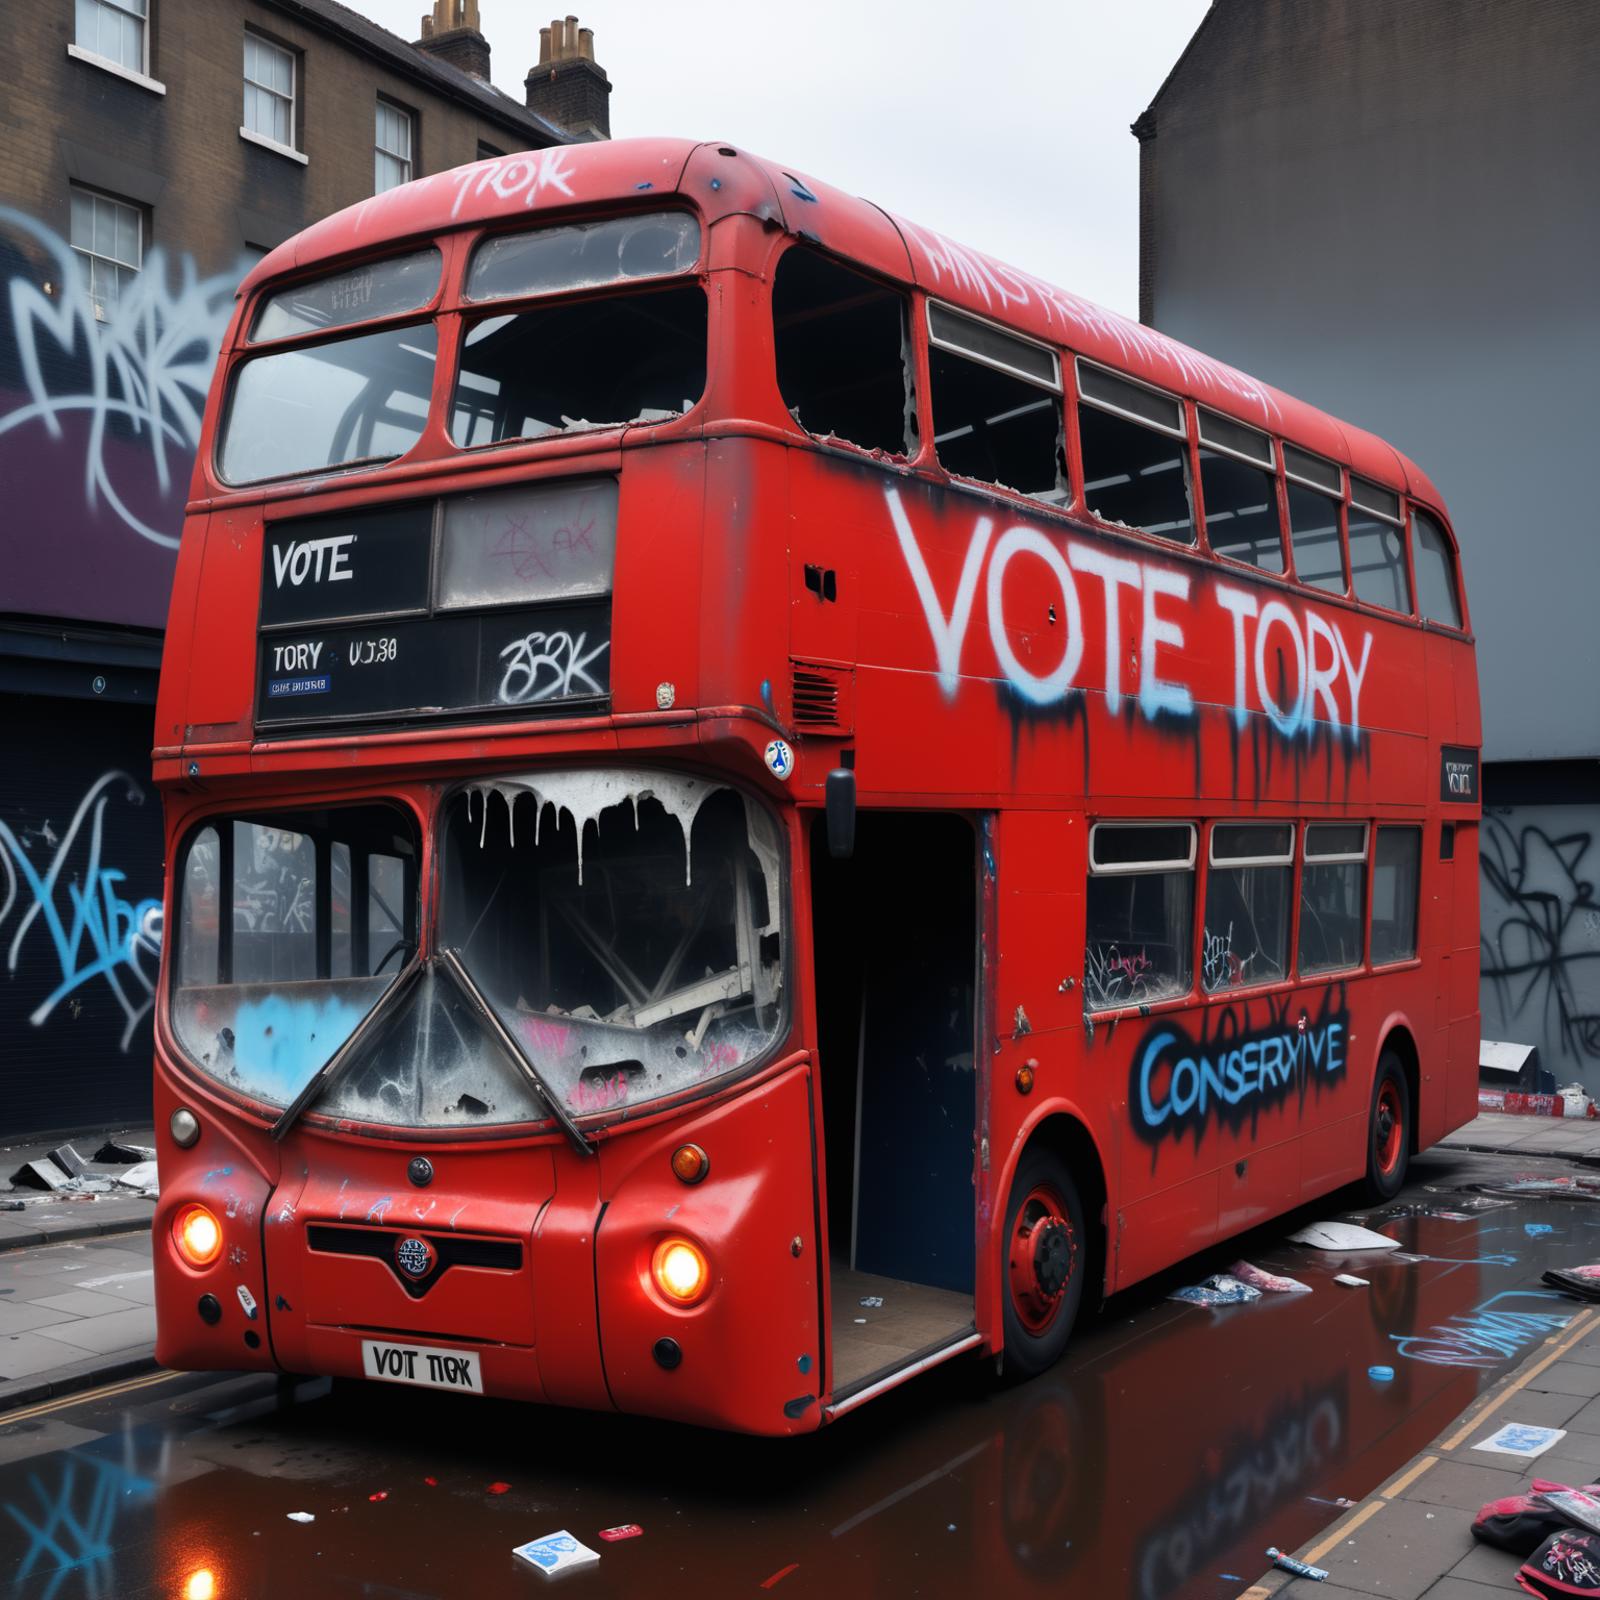 Vote Tory Graffiti on a Red Bus Parked in a Run Down Area